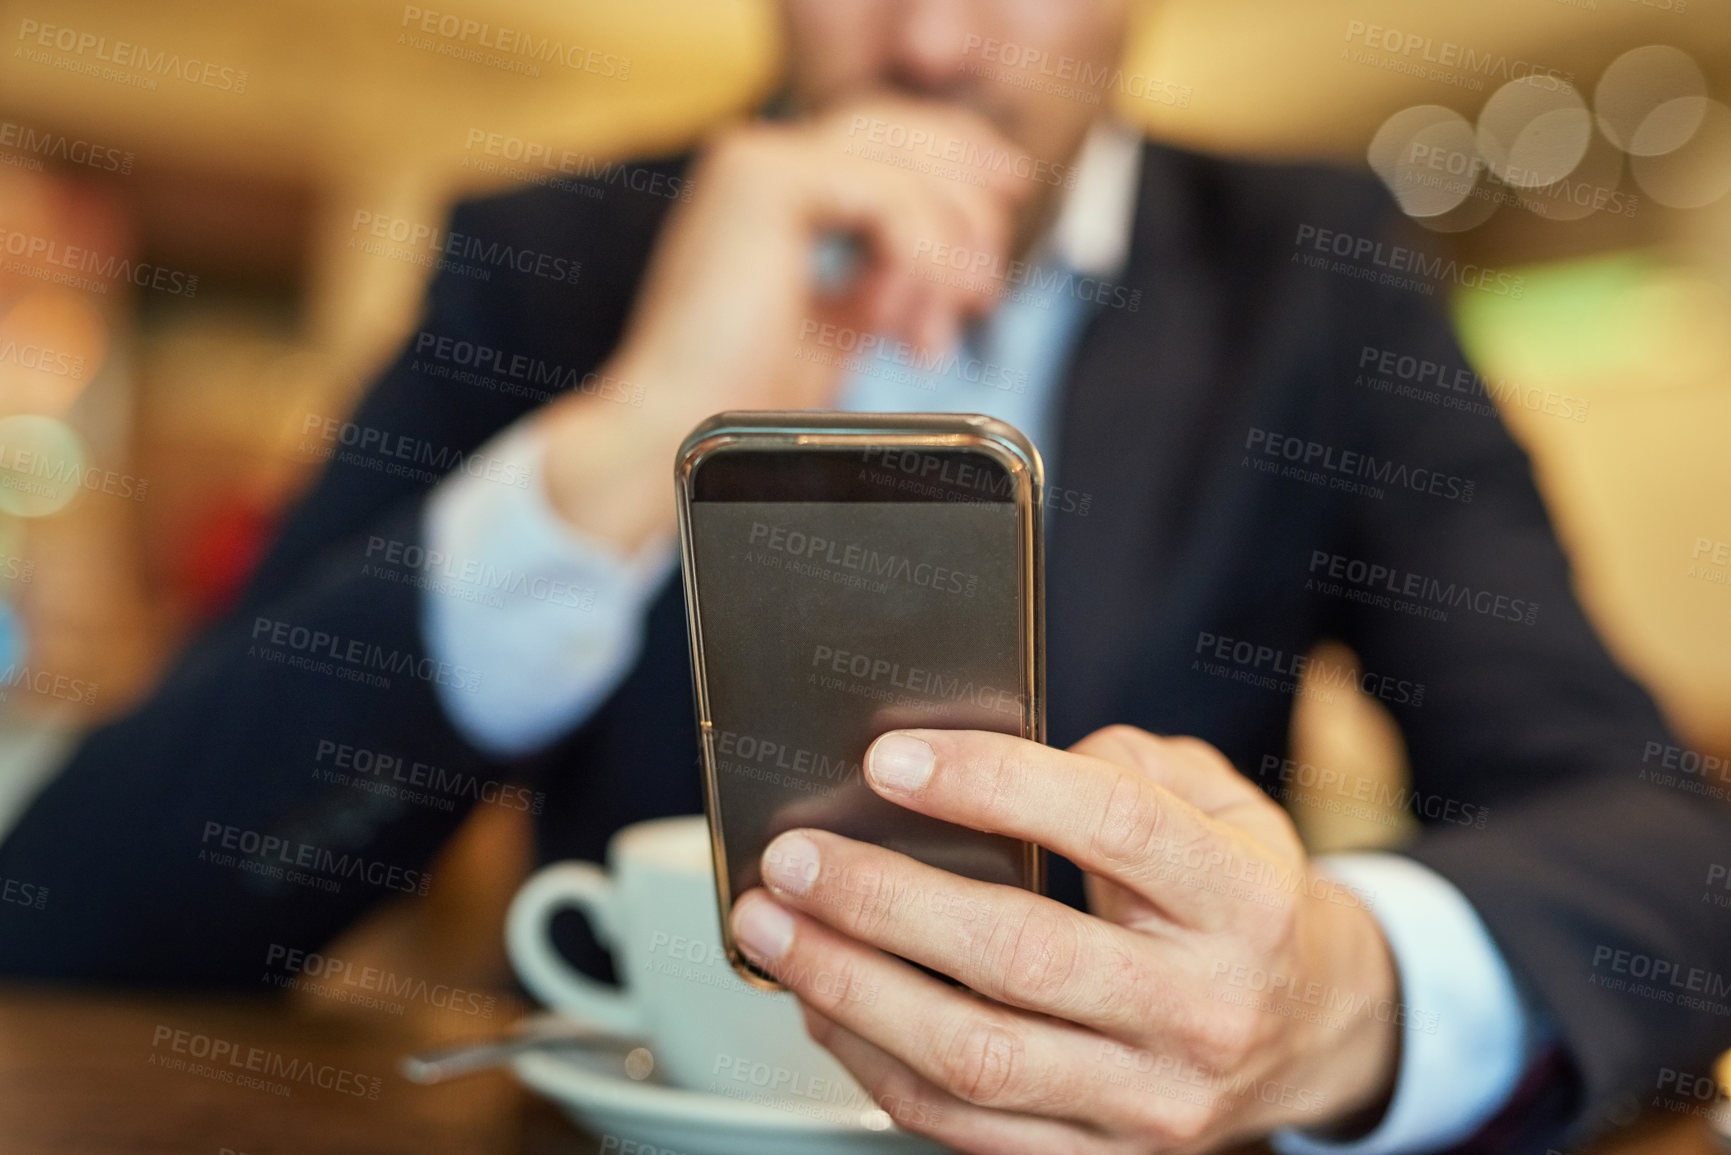 Buy stock photo Shot of an unrecognizable businessman sending a text message while sitting in a coffee shop